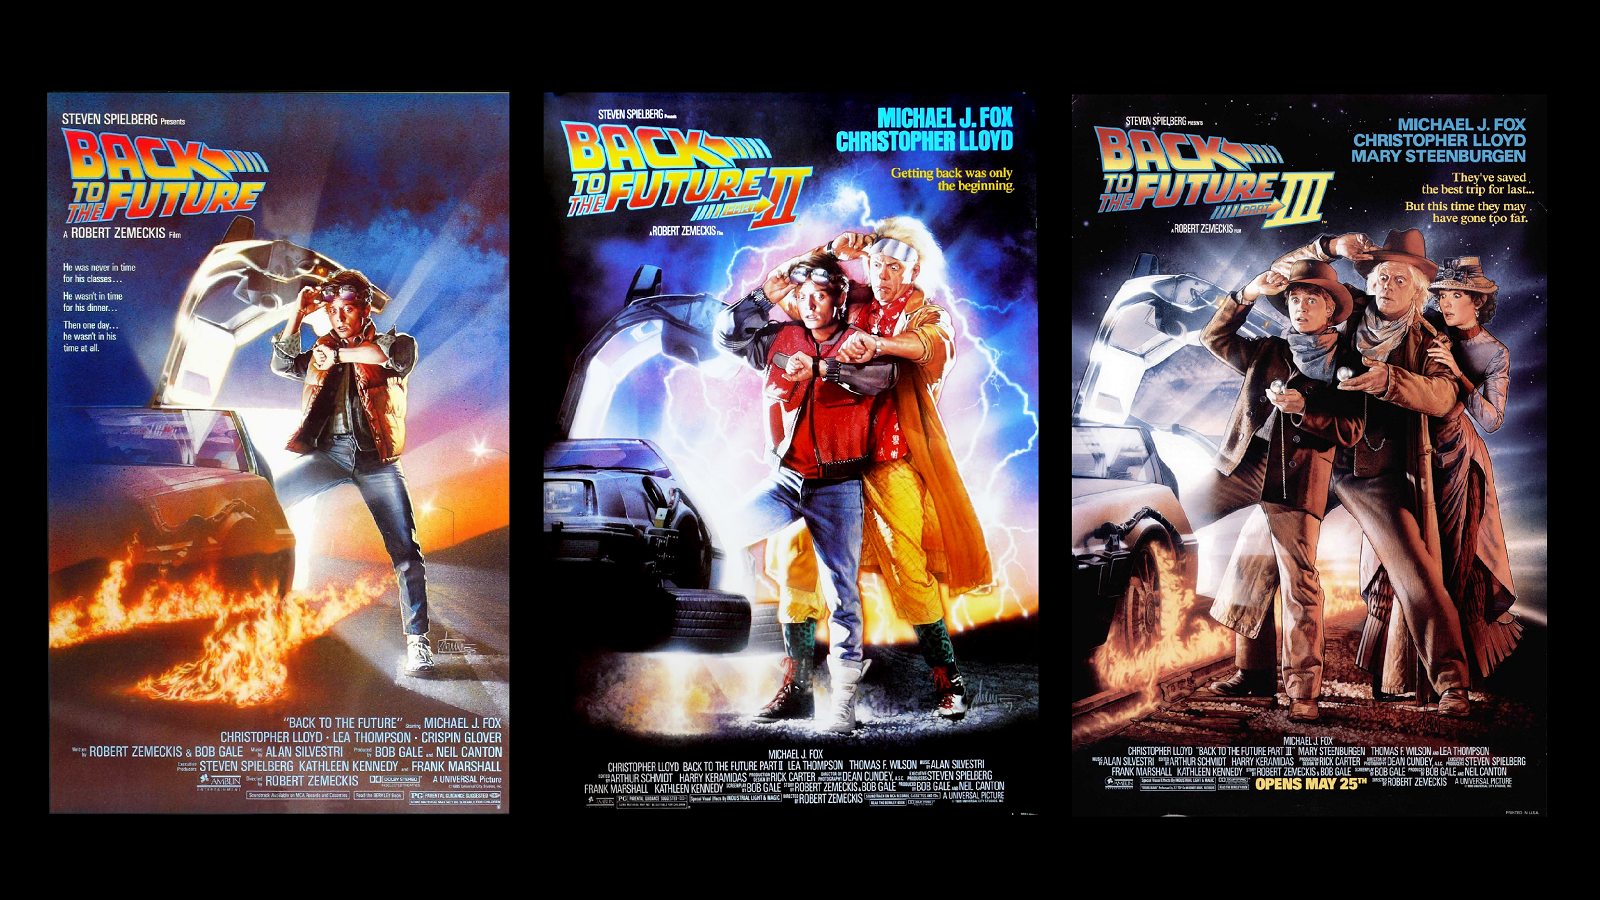 General 1600x900 movies Back to the Future movie poster Michael J. Fox Christopher Lloyd DeLorean Robert Zemeckis actor Steven Spielberg